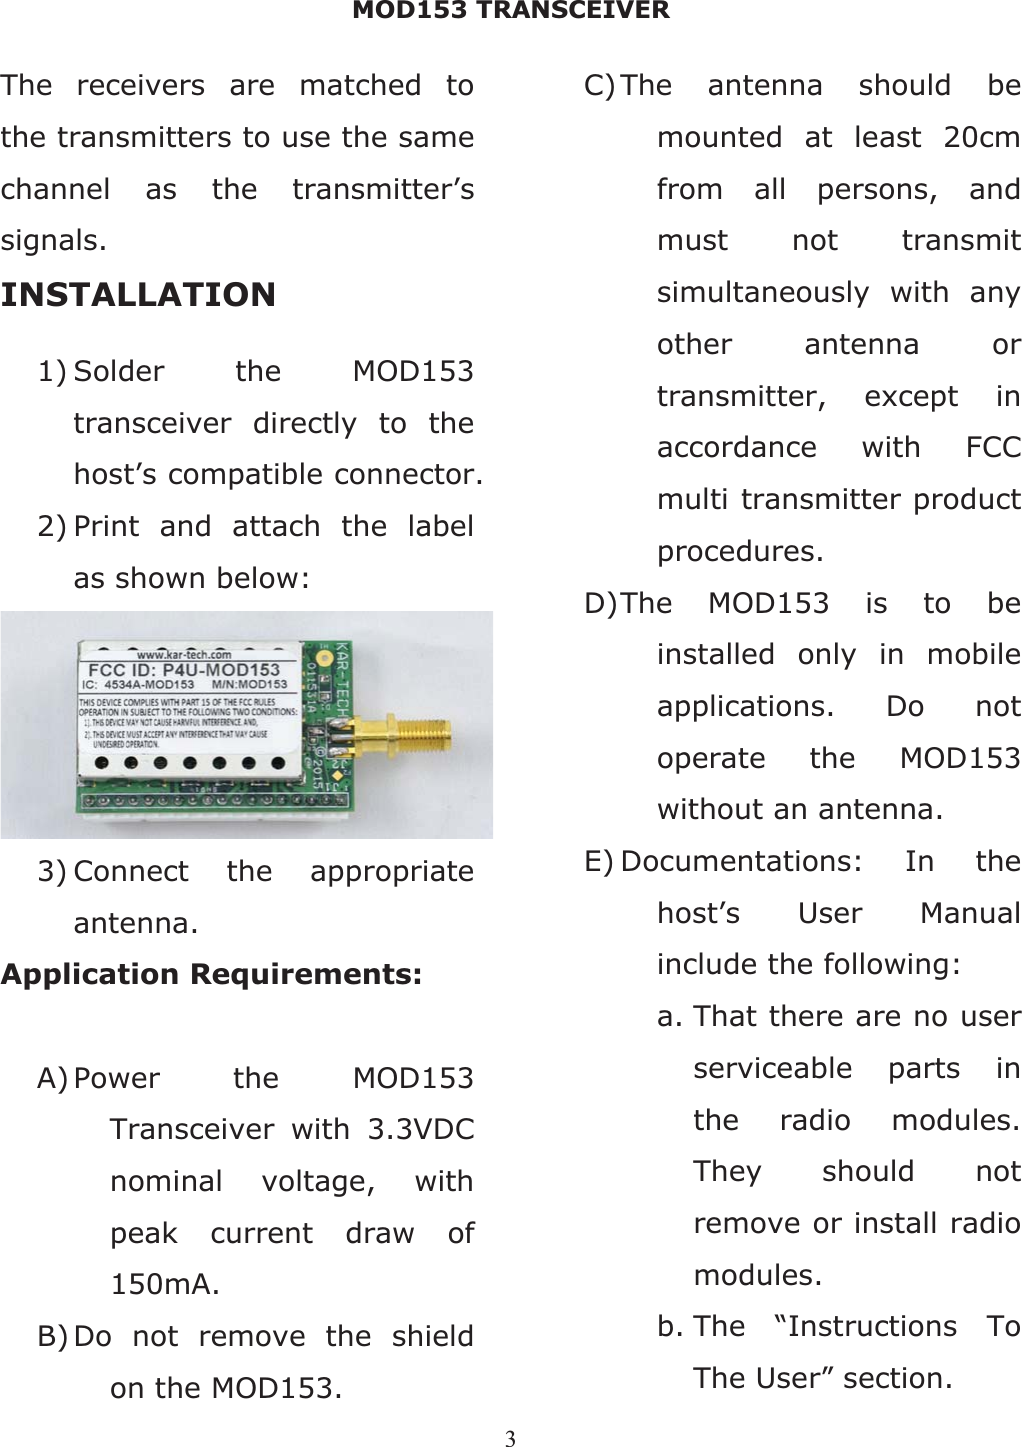 MOD153 TRANSCEIVER 3The receivers are matched to the transmitters to use the same channel as the transmitter’s signals. INSTALLATION 1) Solder the MOD153 transceiver directly to the host’s compatible connector. 2) Print and attach the label as shown below: 3) Connect the appropriate antenna. Application Requirements: A) Power the MOD153 Transceiver with 3.3VDC nominal voltage, with peak current draw of 150mA.B)Do not remove the shield on the MOD153. C)The antenna should be mounted at least 20cm from all persons, and must not transmit simultaneously with any other antenna or transmitter, except in accordance with FCC multi transmitter product procedures.D)The MOD153 is to be installed only in mobile applications. Do not operate the MOD153 without an antenna. E) Documentations: In the host’s User Manual include the following: a. That there are no user serviceable parts in the radio modules. They should not remove or install radio modules. b. The “Instructions To The User” section. 